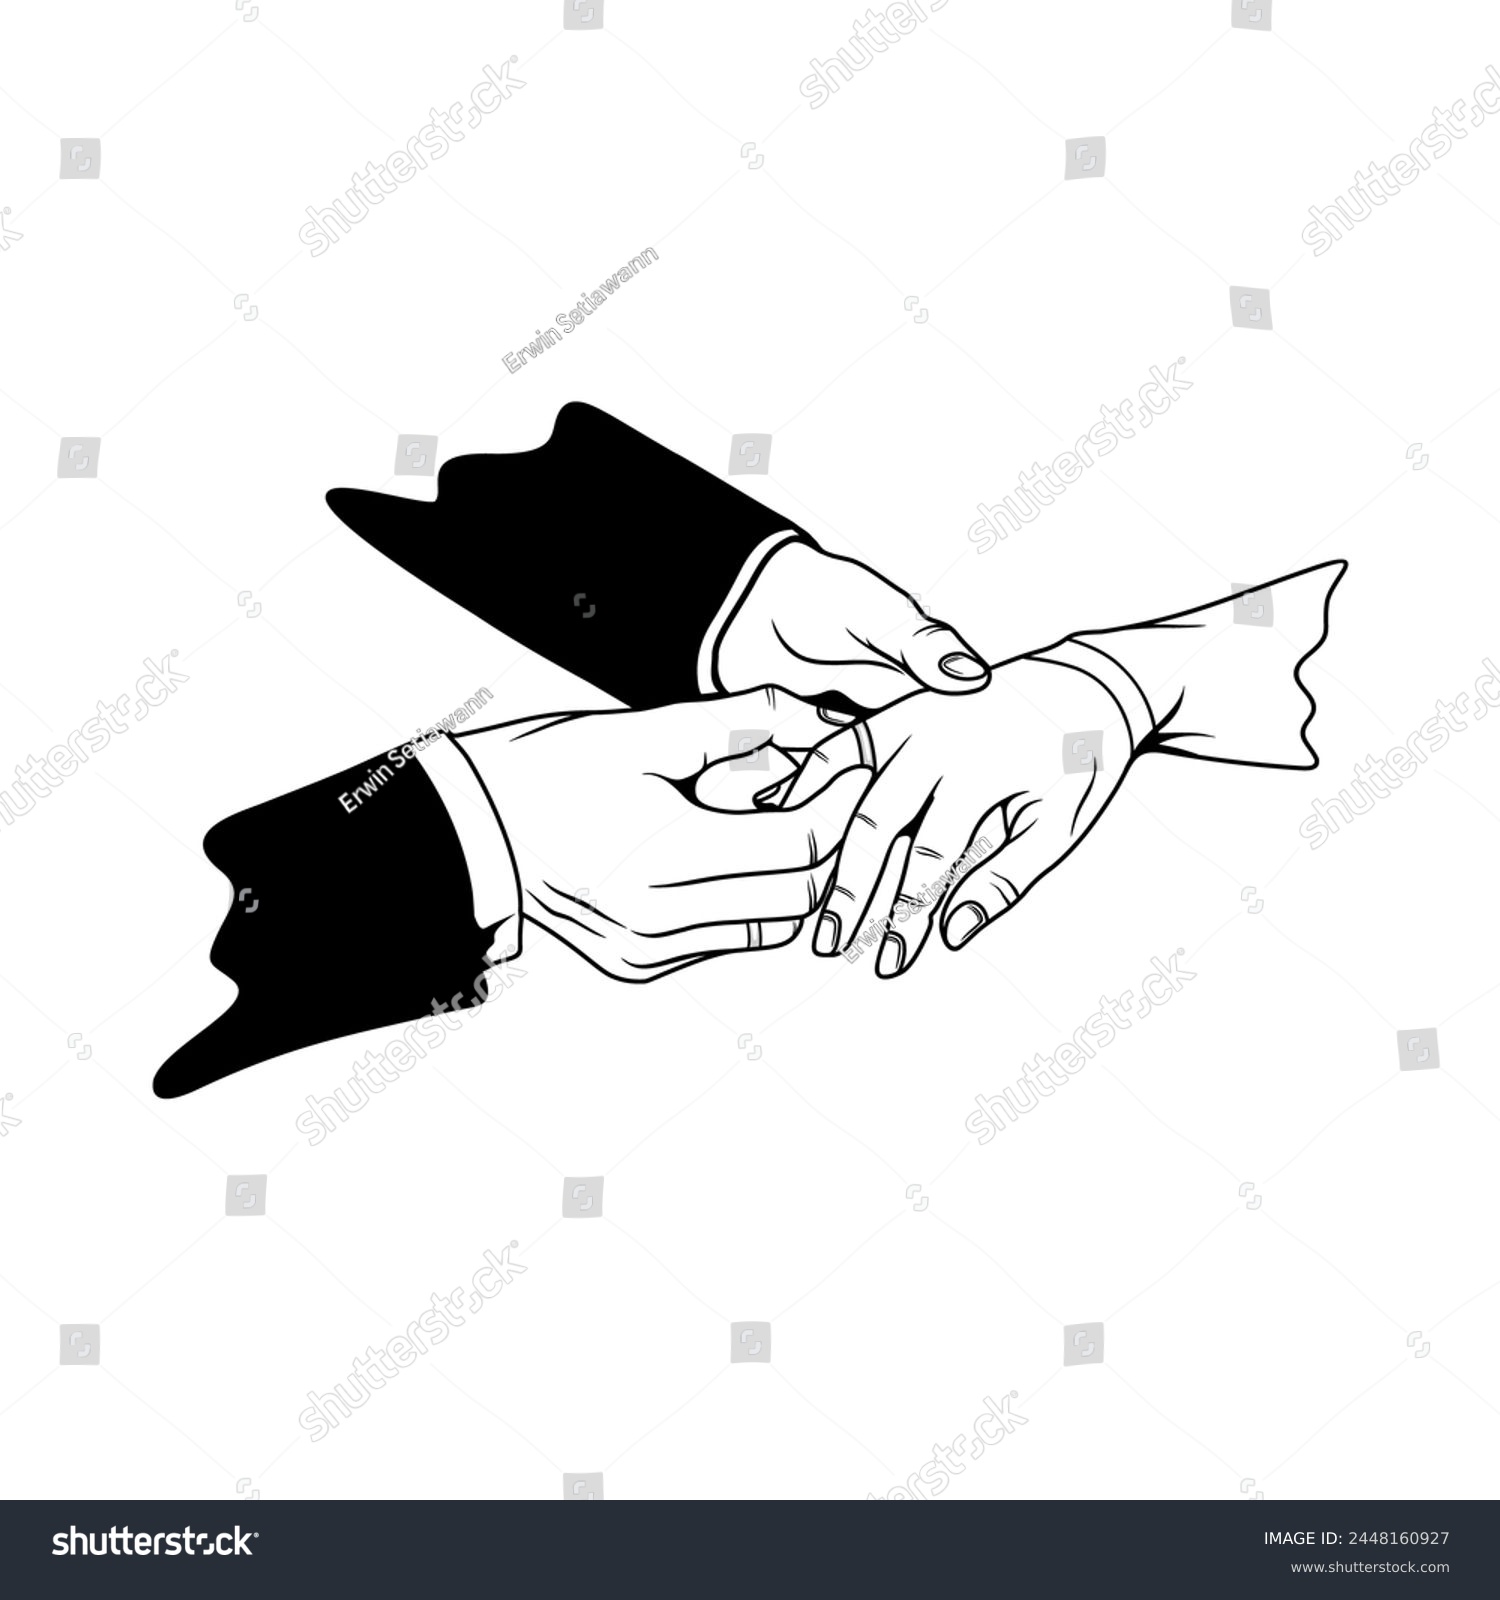 SVG of hand gesture of a man putting a ring on a woman's ring finger, putting on a ring black and white svg